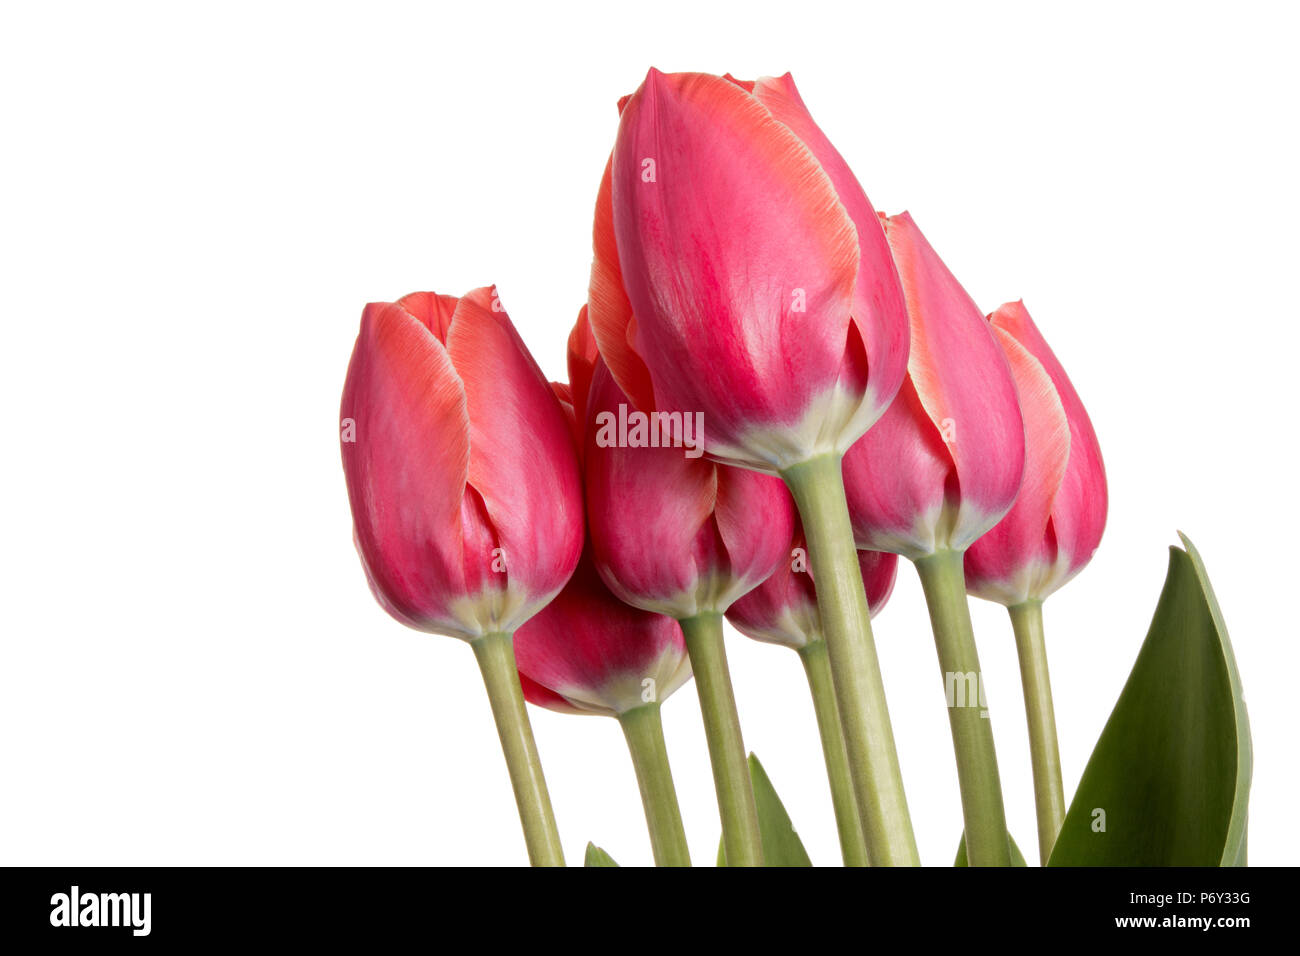 Garden Flower bouquet from pink tulips. Isolation on a white background Stock Photo